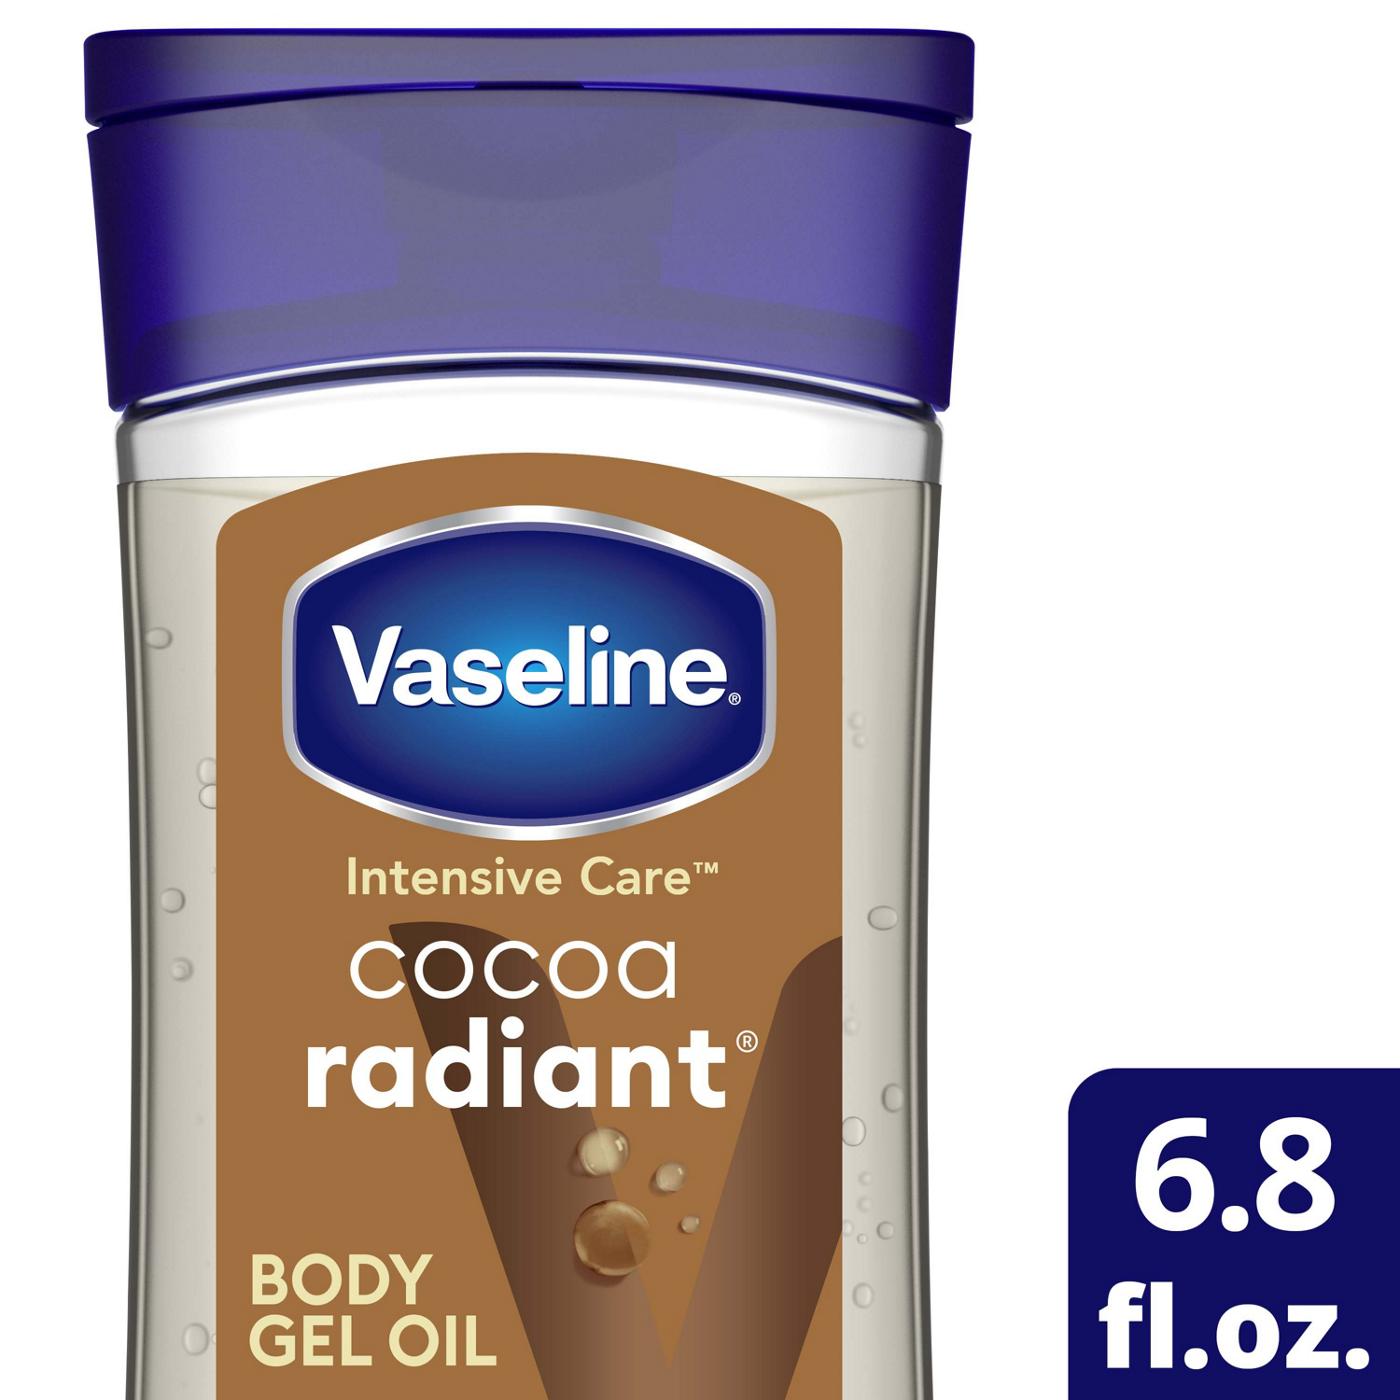 Vaseline Intensive Care for Glowing Skin Cocoa Radiant; image 2 of 8